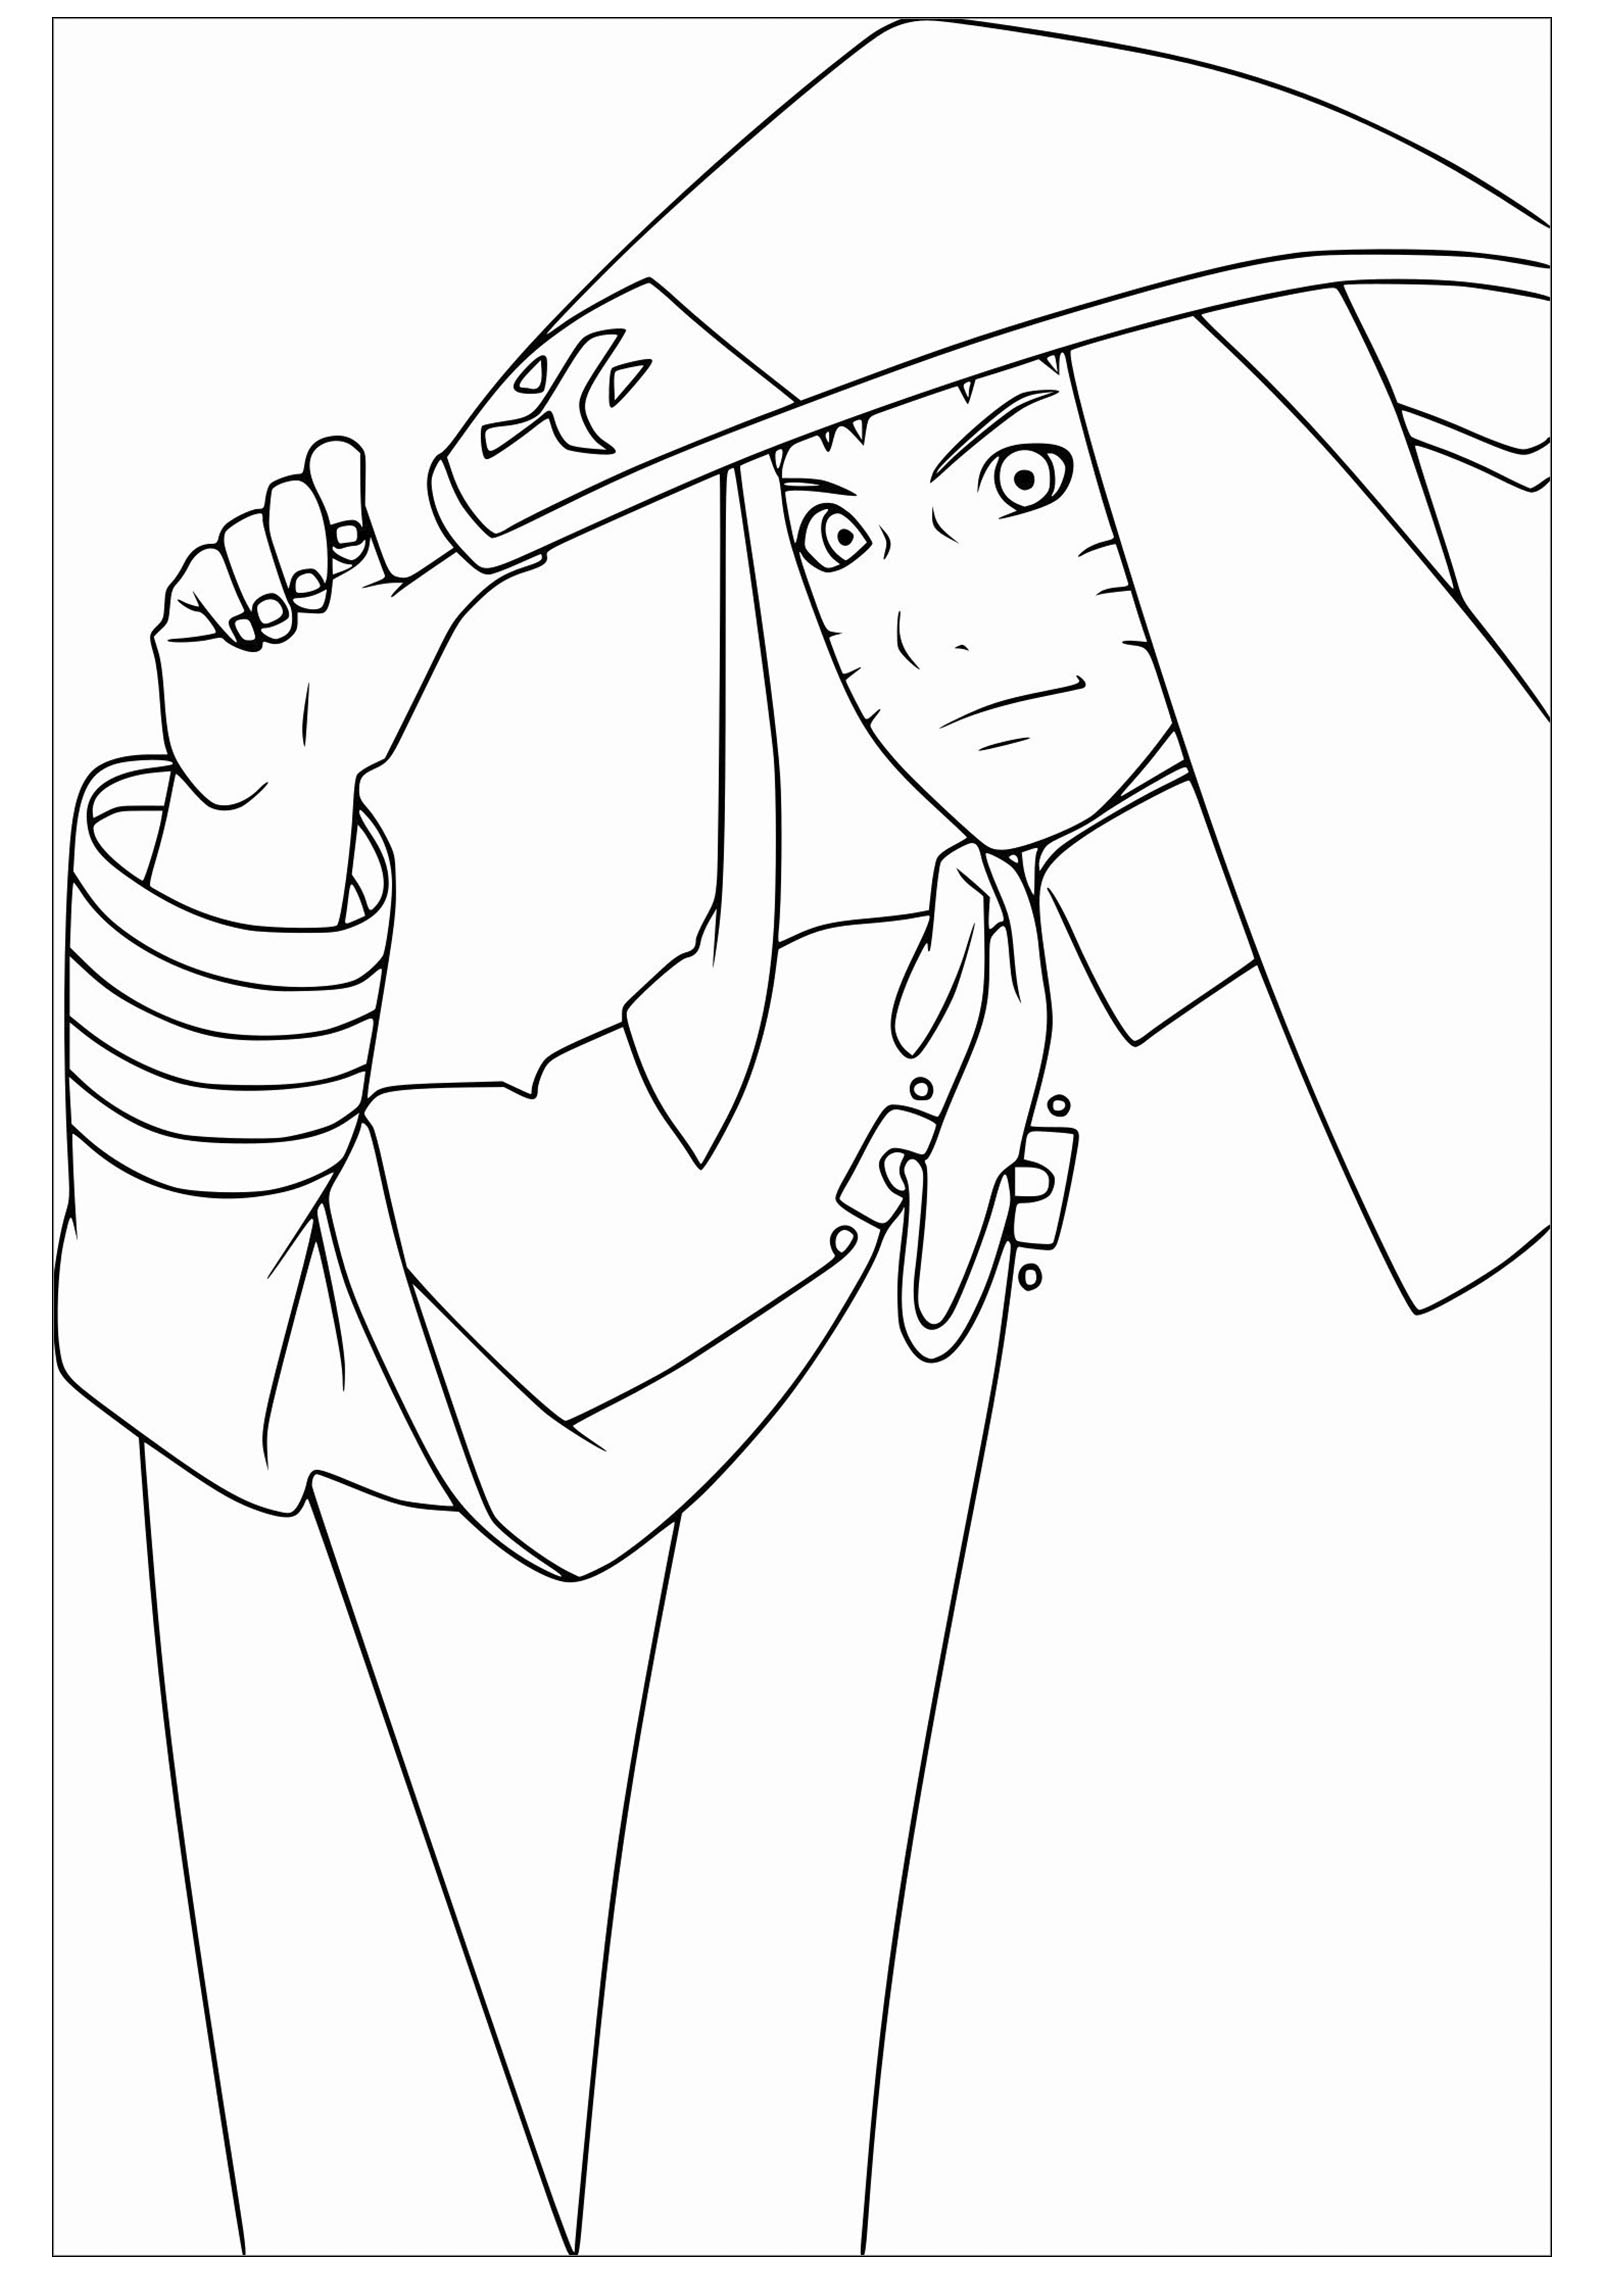 813 Cute Naruto Coloring Pages with disney character